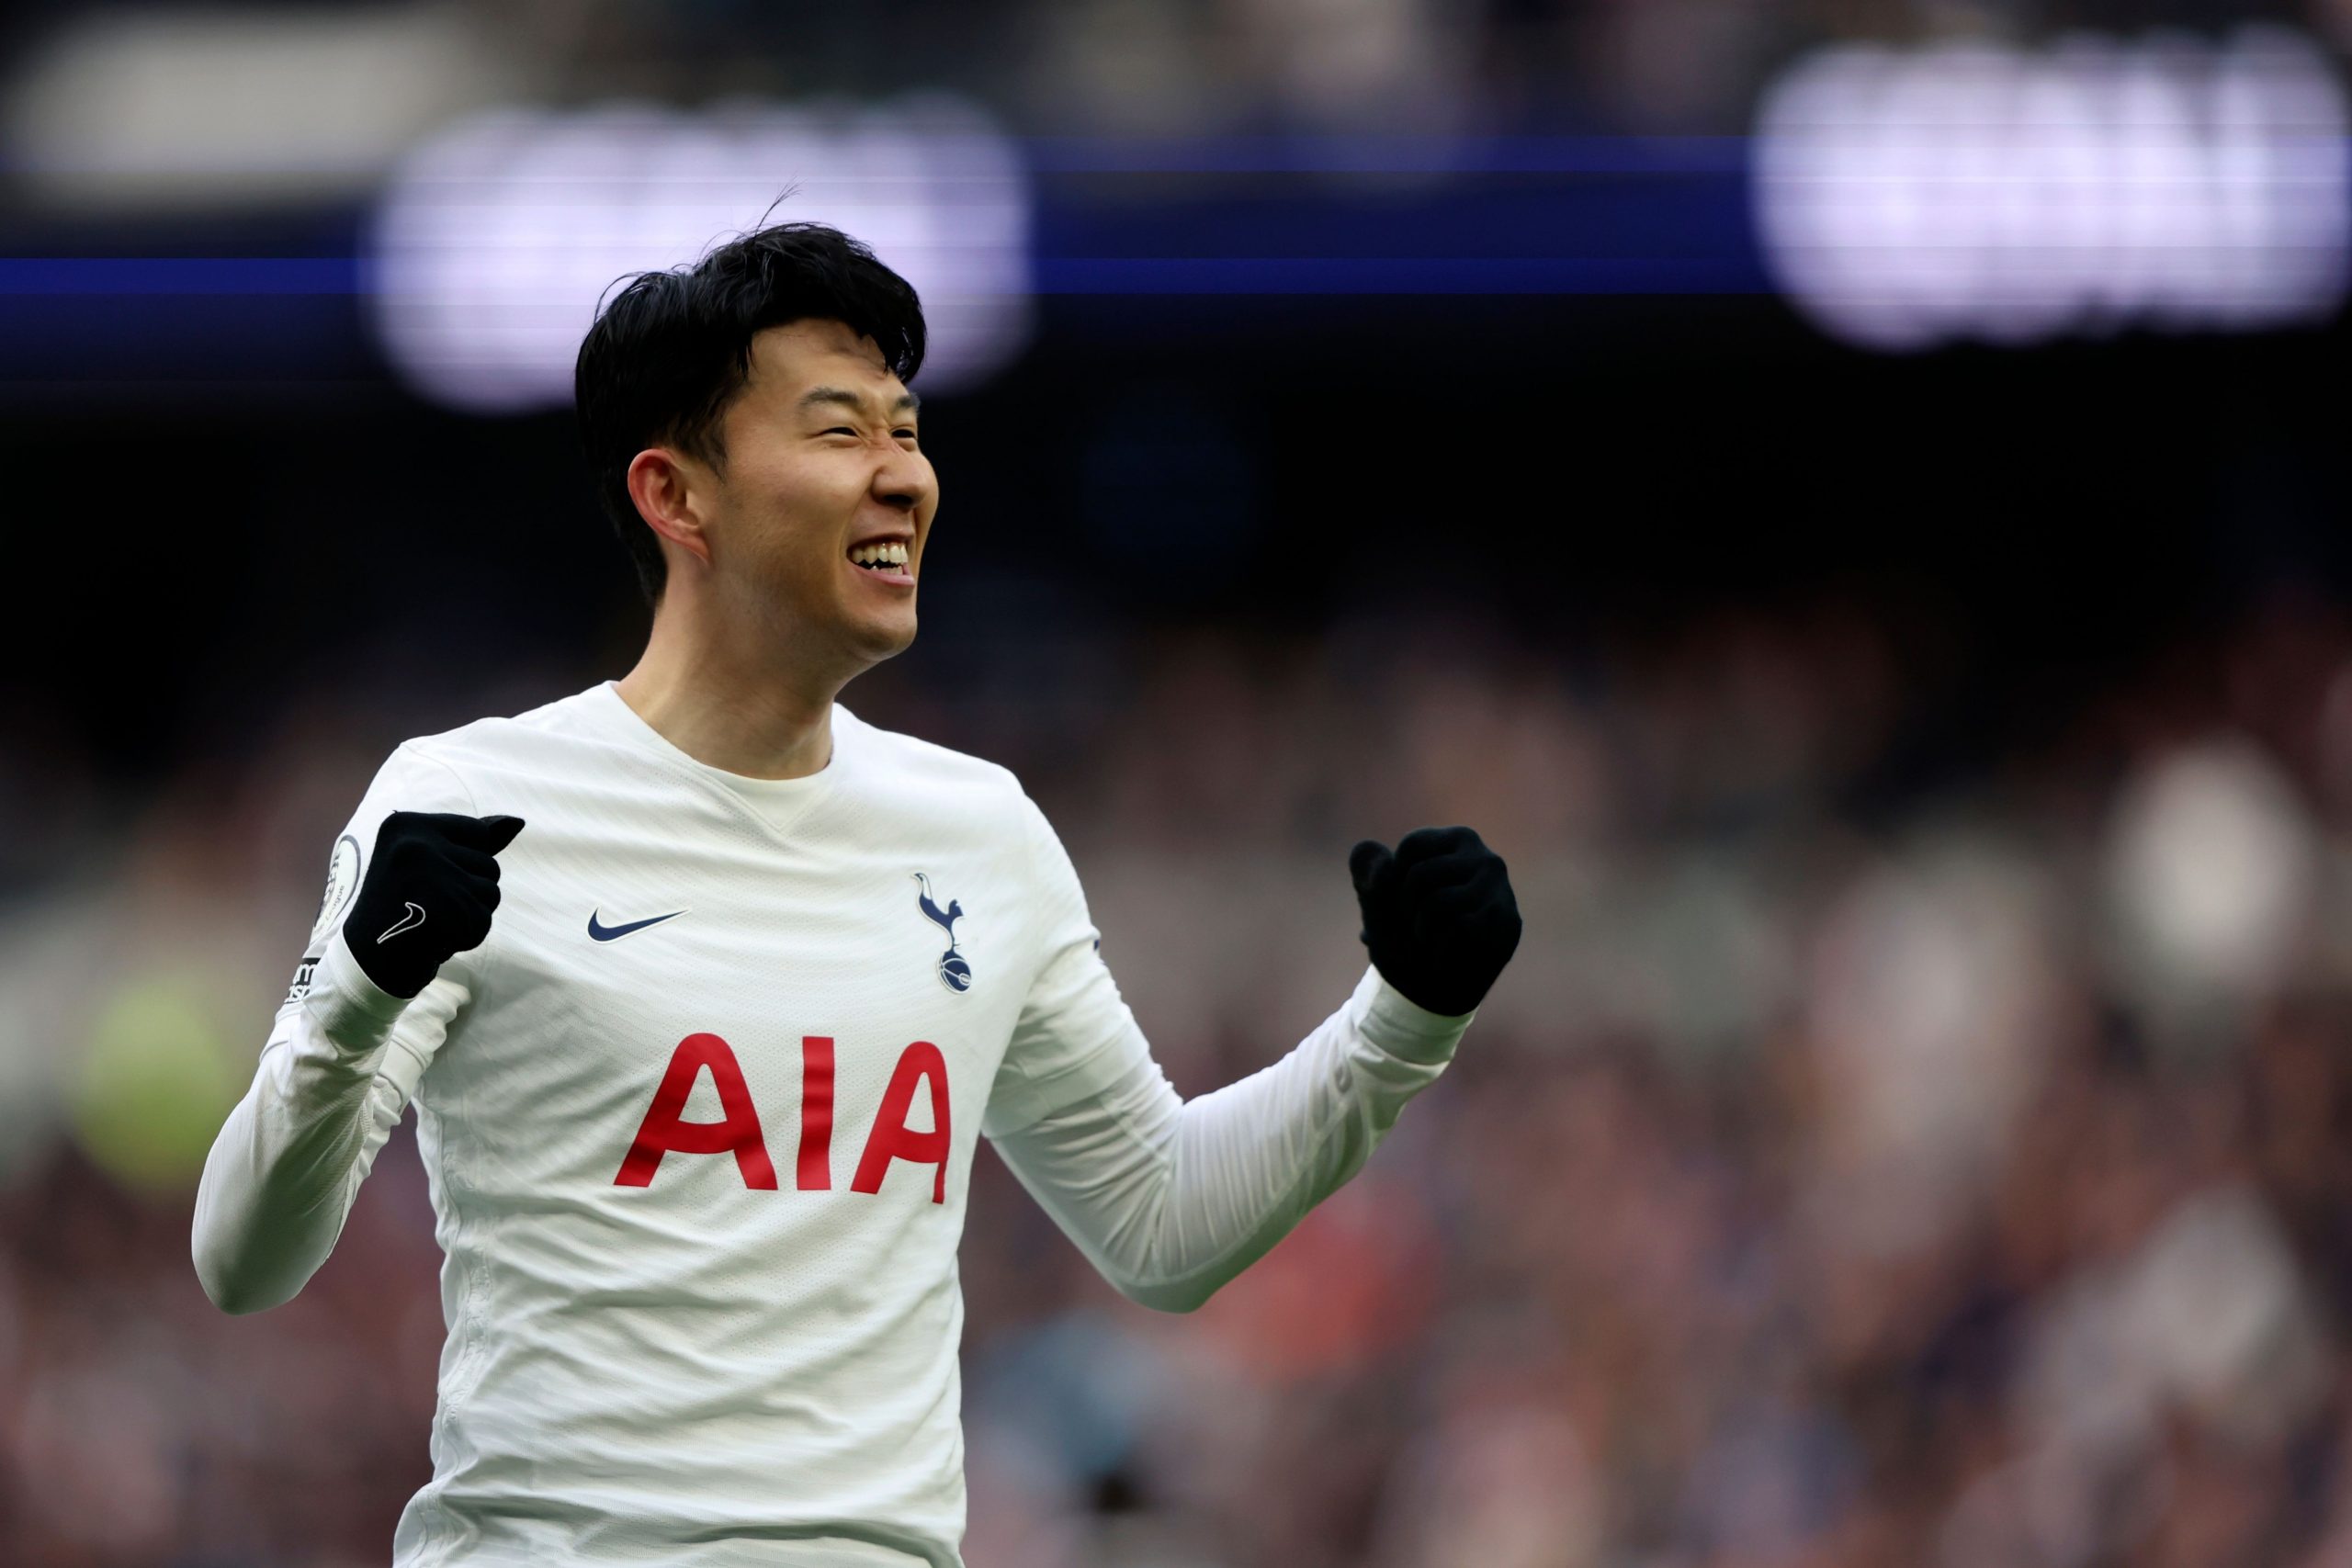 Premier League: Tottenham Hotspur thrashes Newcastle United 5-1 to rise to 4th on table